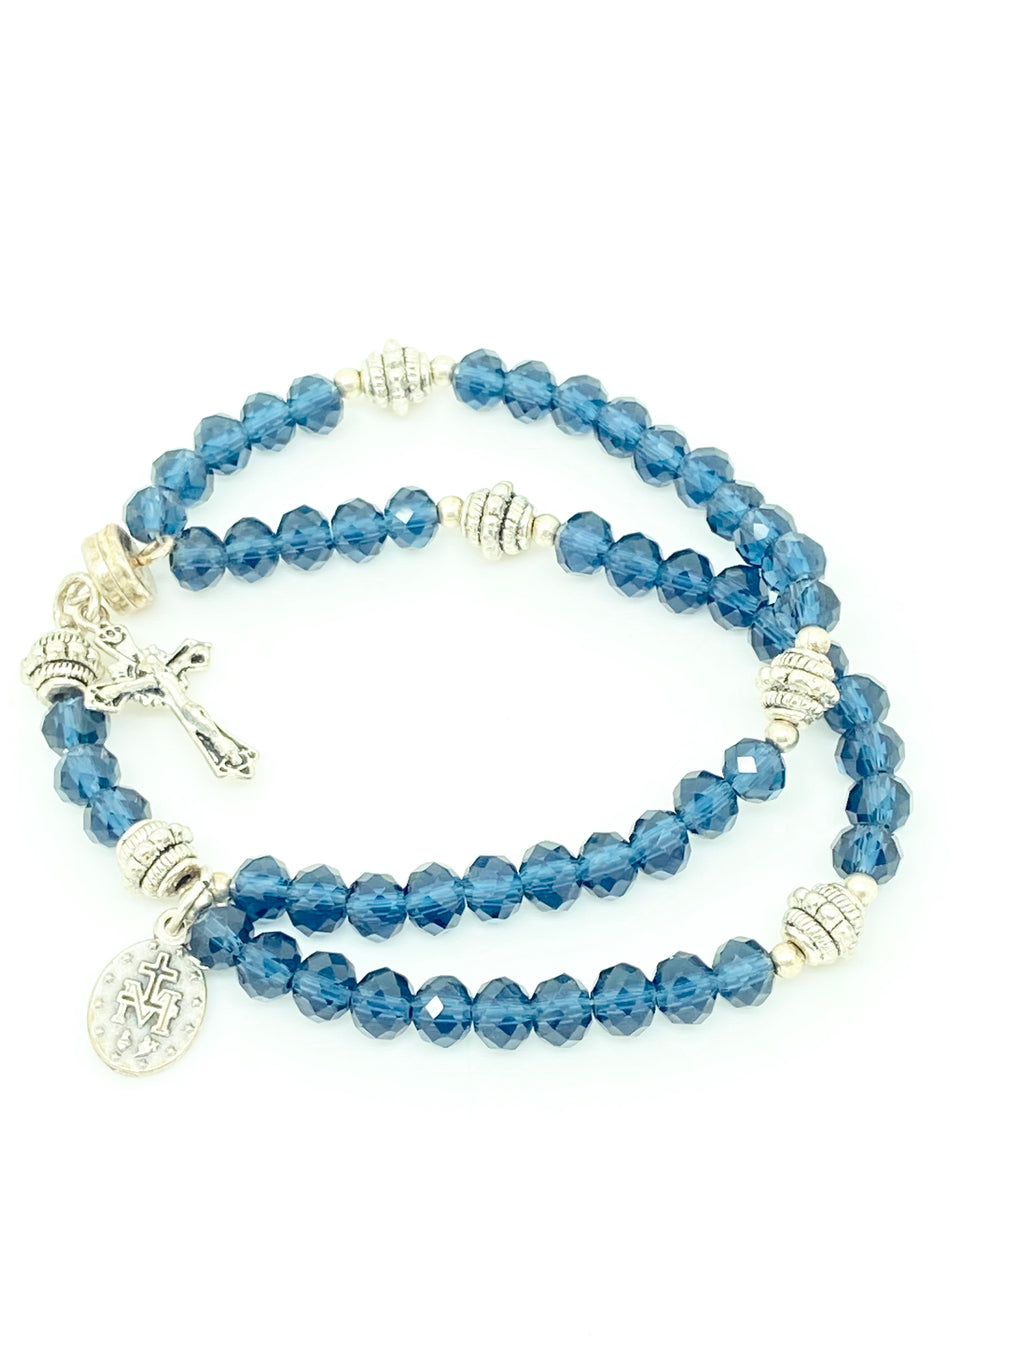 Midnight Blue Crystal Wrist Rosary - Unique Catholic Gifts